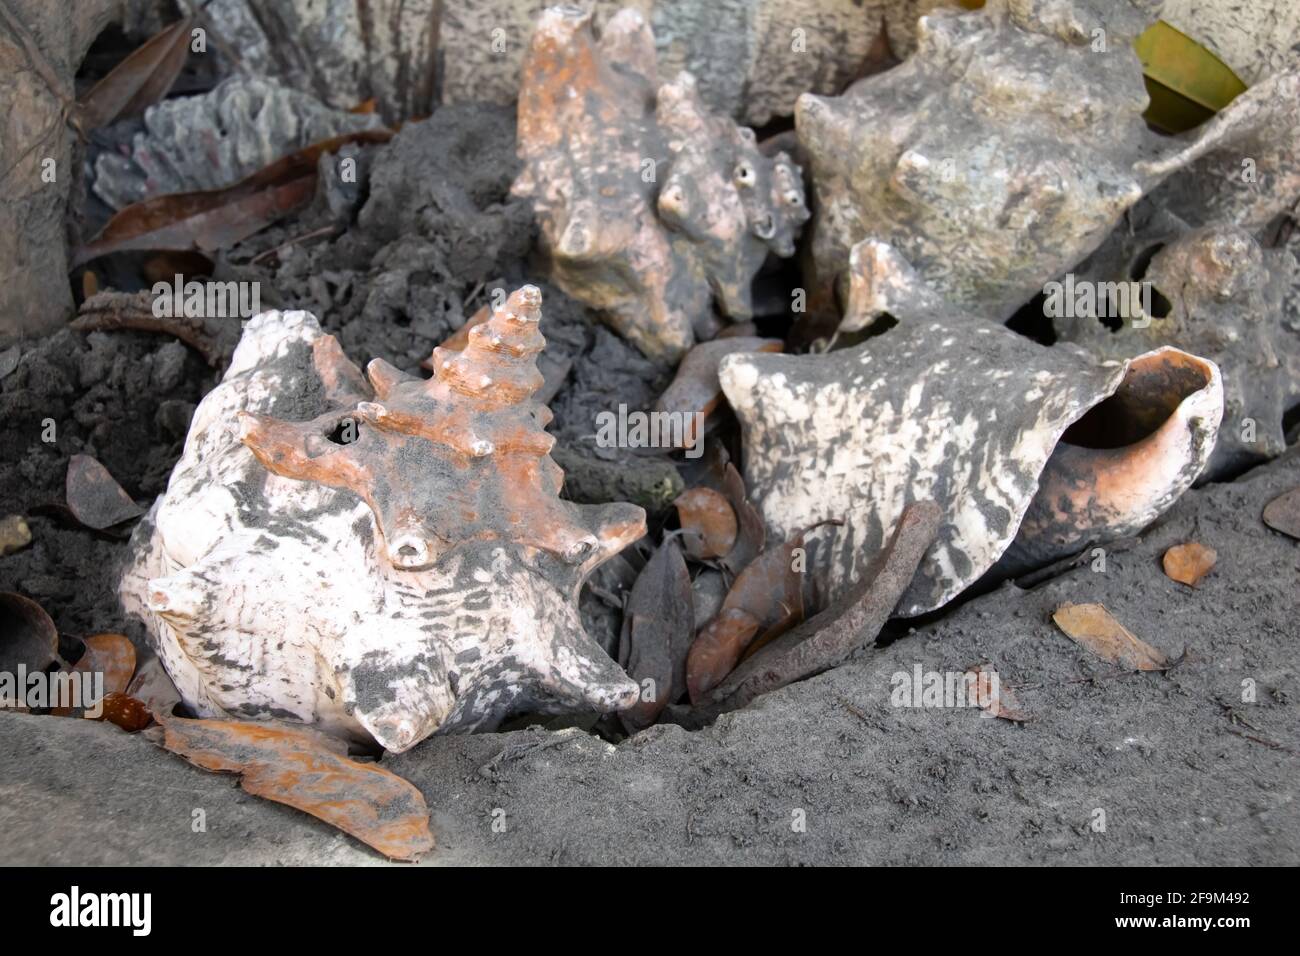 Pink and white adult queen conch shells in a Barbados garden covered in black volcanic dust or ash from the Soufriere volcano in St. Vincent. Stock Photo